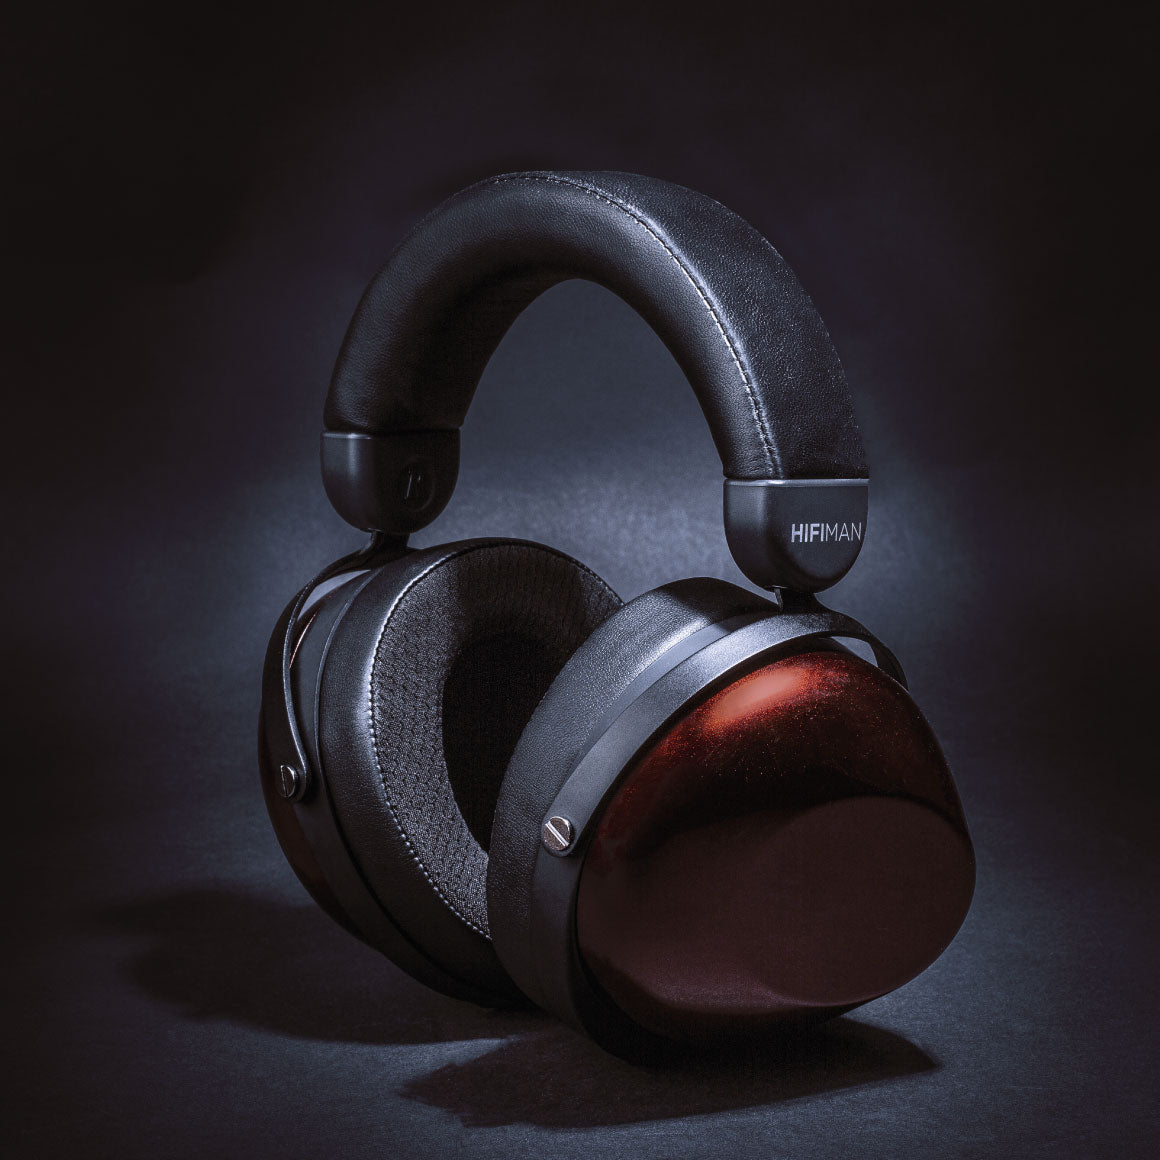 Audio Experience At Home Program - HIFIMAN HE-R9 Closed-Back Dynamic Driver Headphones